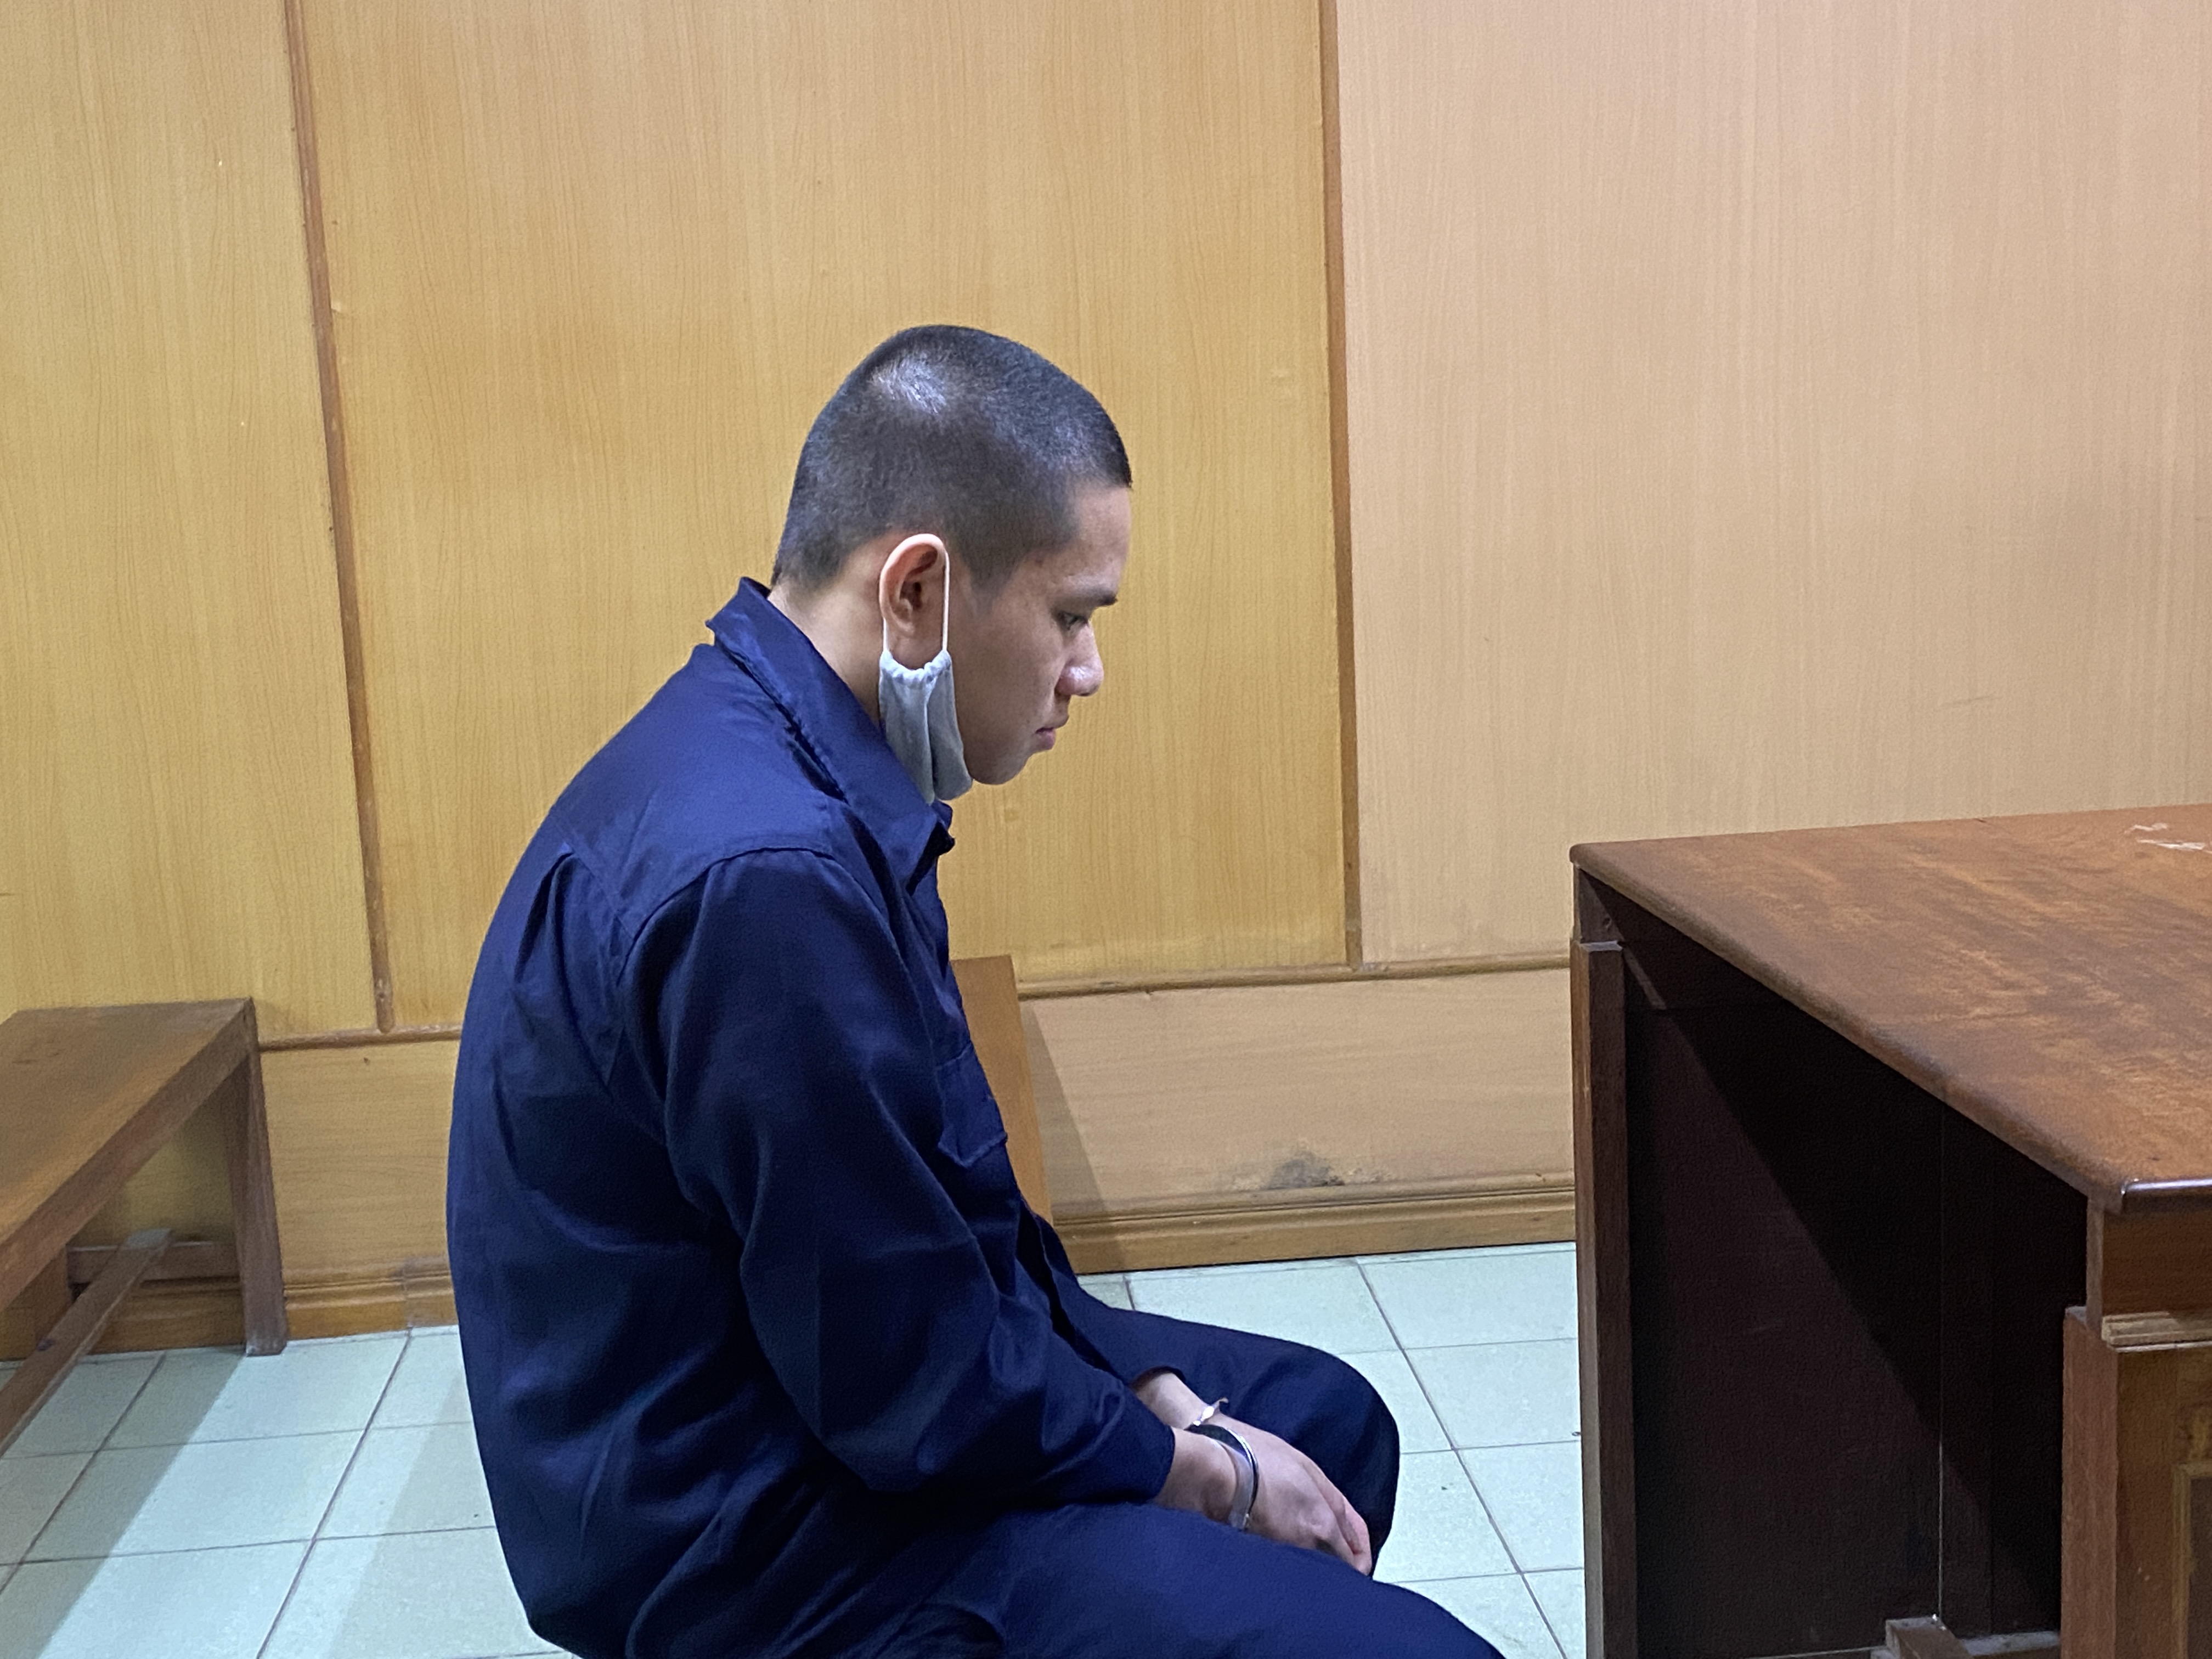 Man receives life sentence for setting ex-girlfriend on fire in Ho Chi Minh City